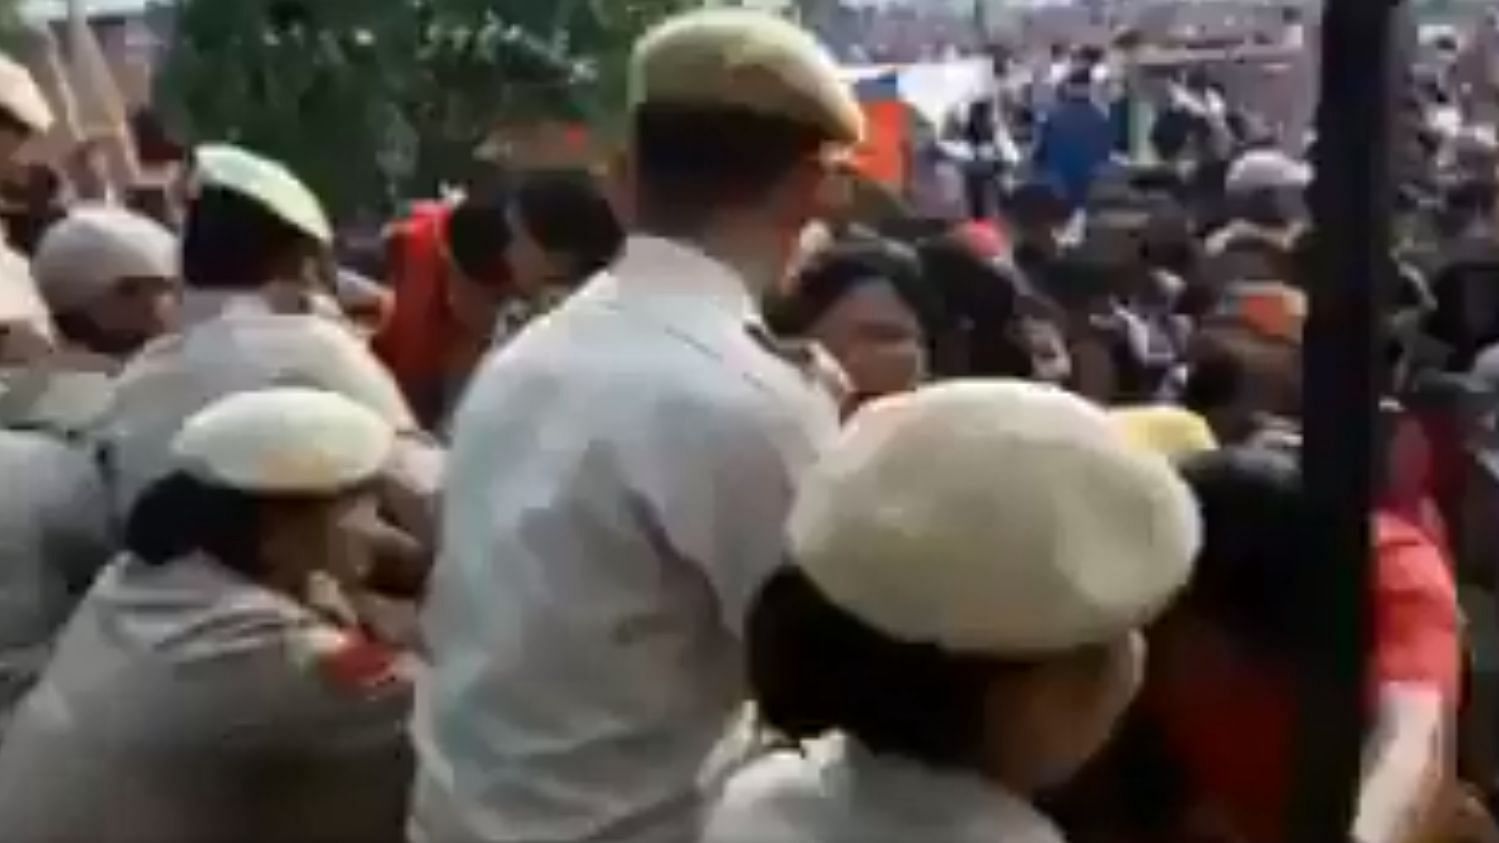 In the video, people are seen rushing out of the rally venue and the police are trying to control the crowd.